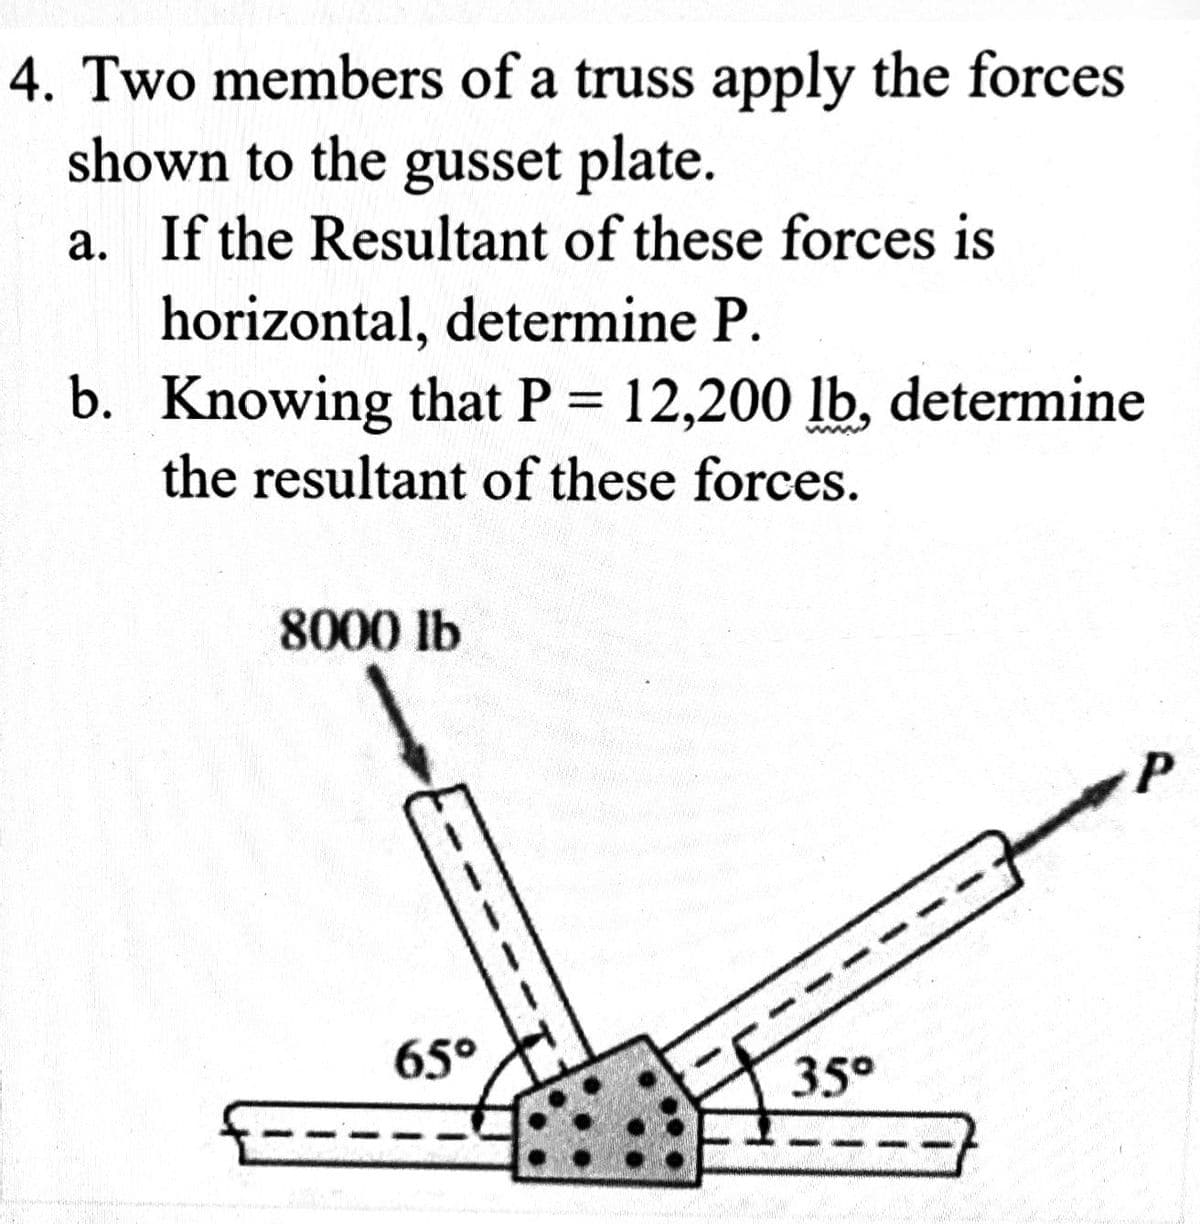 4. Two members of a truss apply the forces
shown to the gusset plate.
a. If the Resultant of these forces is
horizontal, determine P.
b. Knowing that P = 12,200 lb, determine
the resultant of these forces.
8000 lb
65°
35°
P